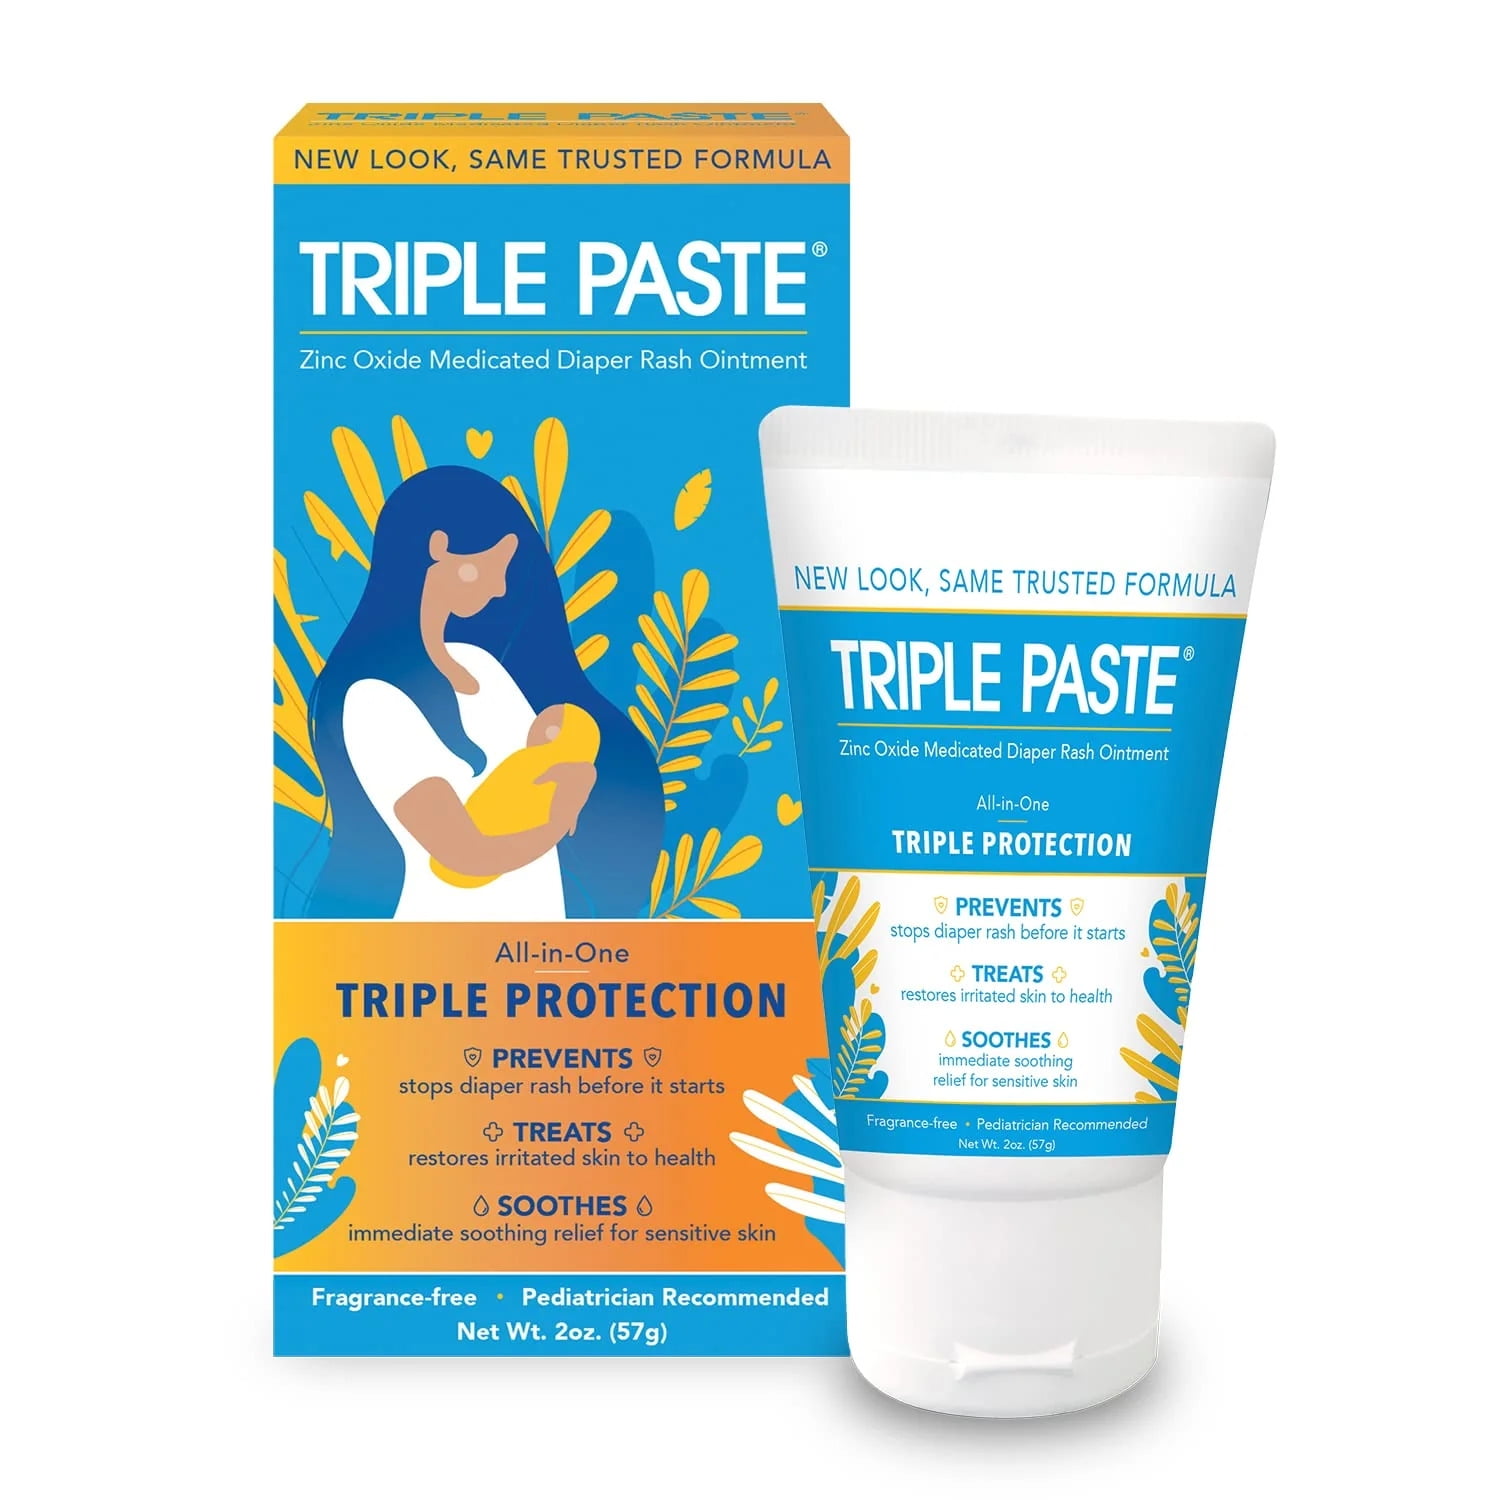 Triple Paste Medicated Ointment for Diaper Rash, 16 Ounce